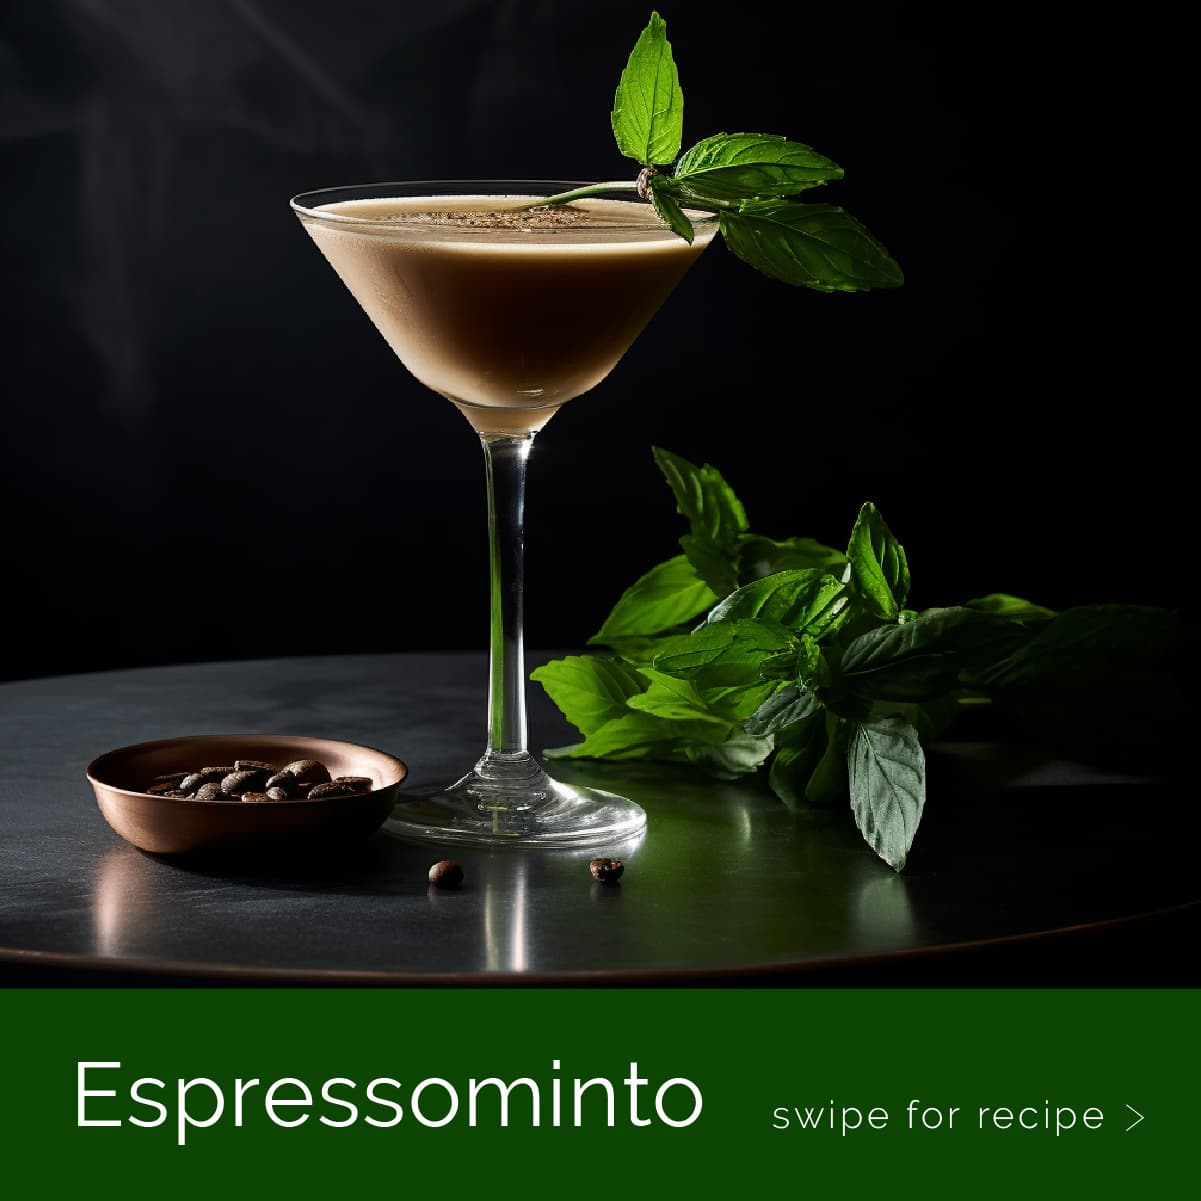 An Espressominto cocktail